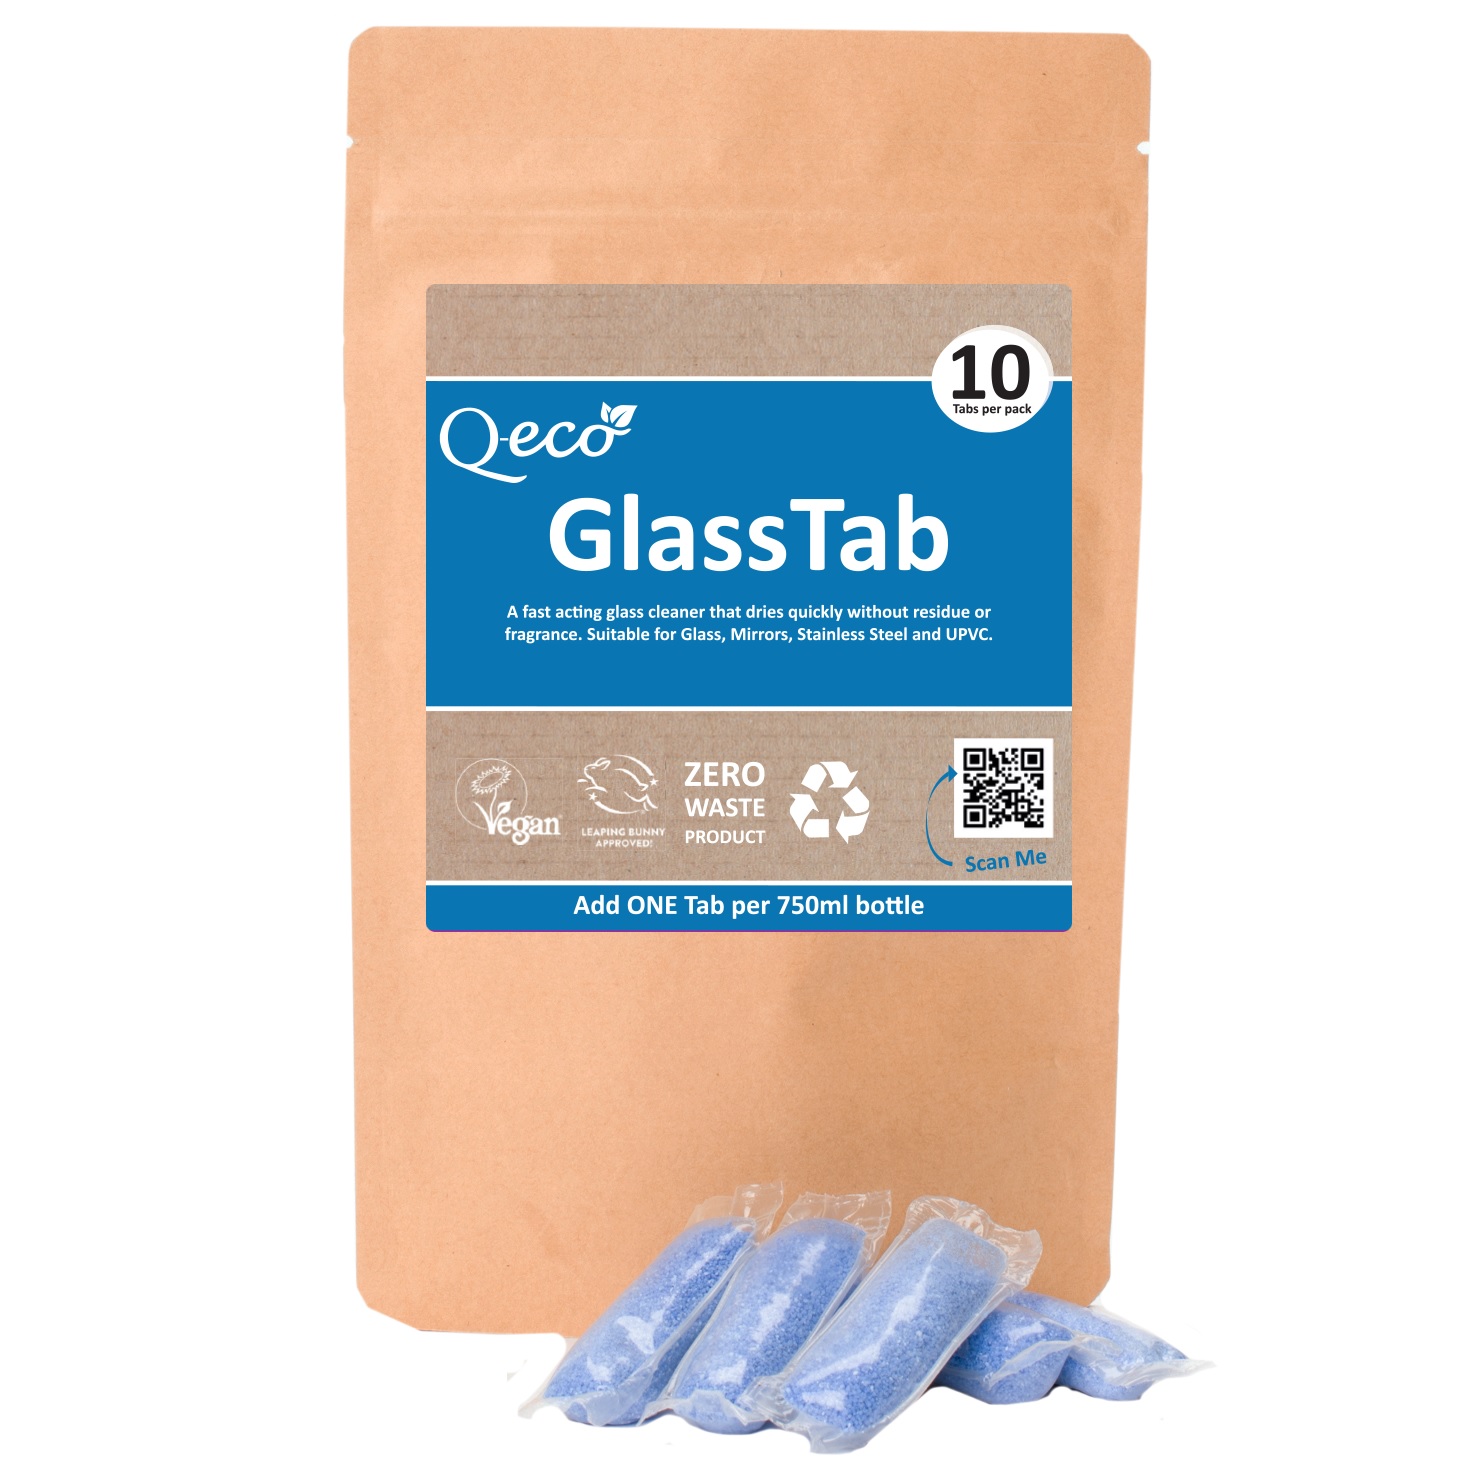 Q-Eco-GlassTab---Glass---Mirror-Cleaning-Tabs--Pack-of-10-